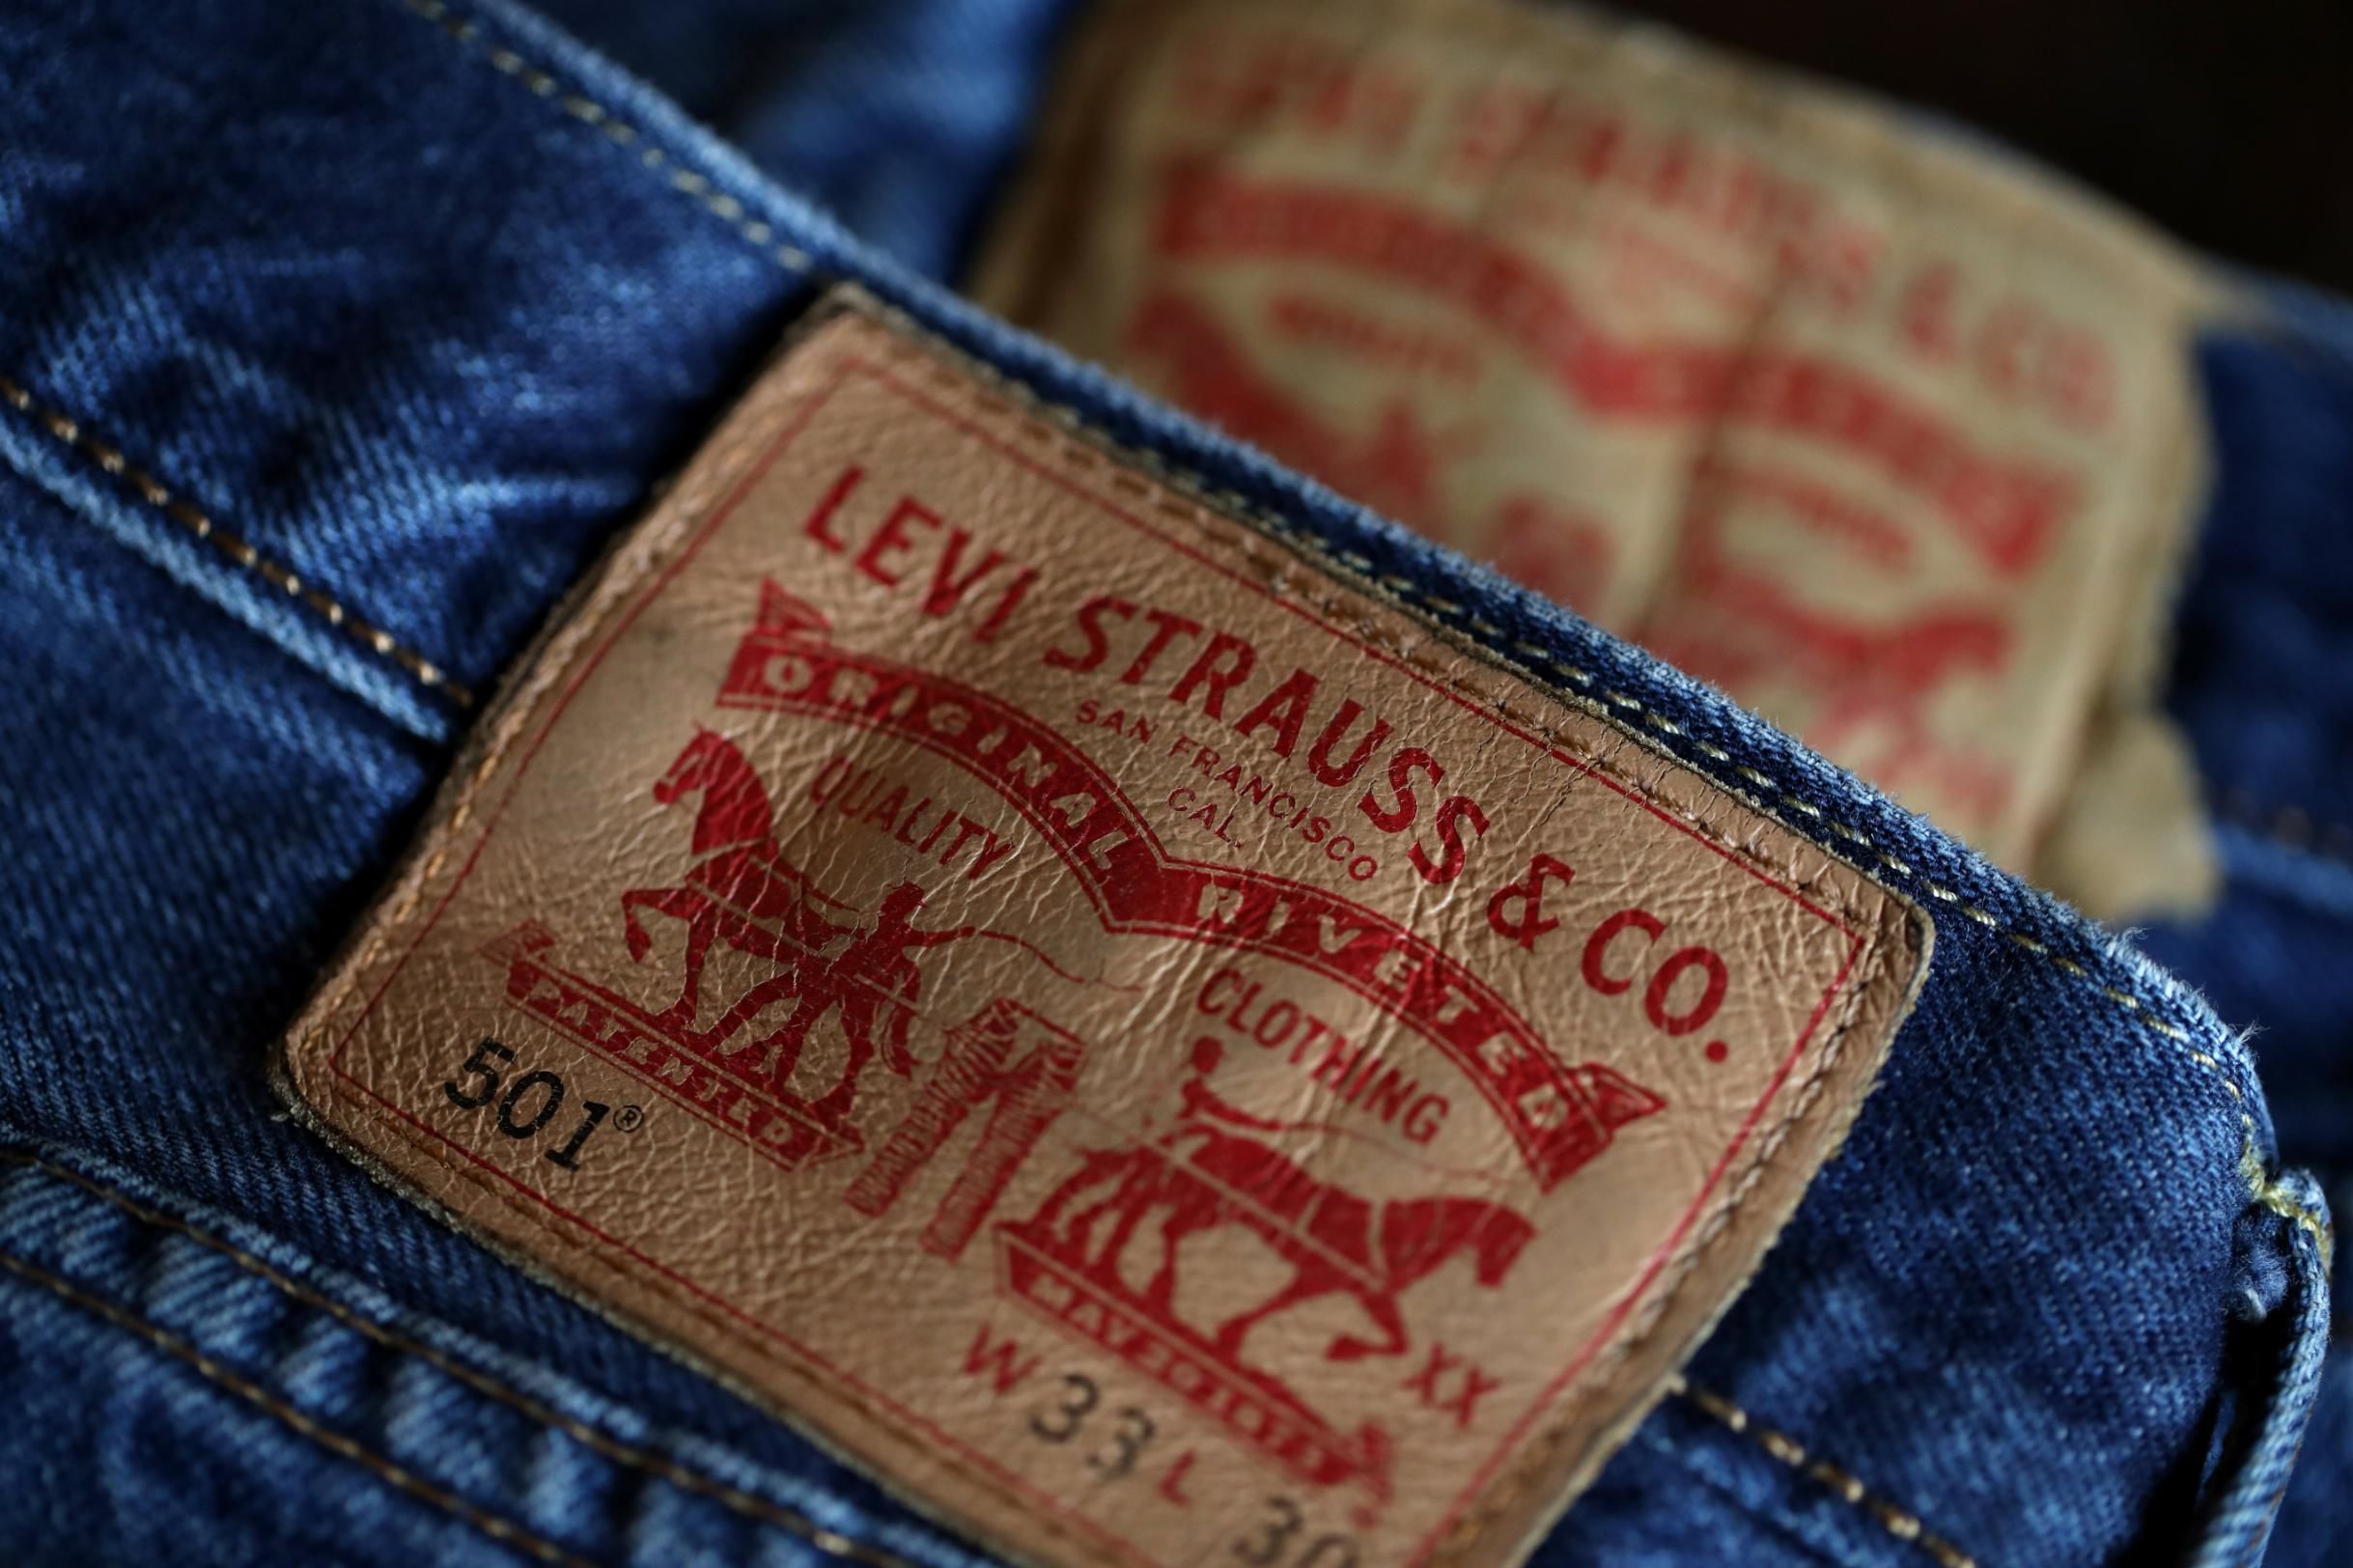 Levi's CEO: Don't put your jeans in the freezer | CNN Business